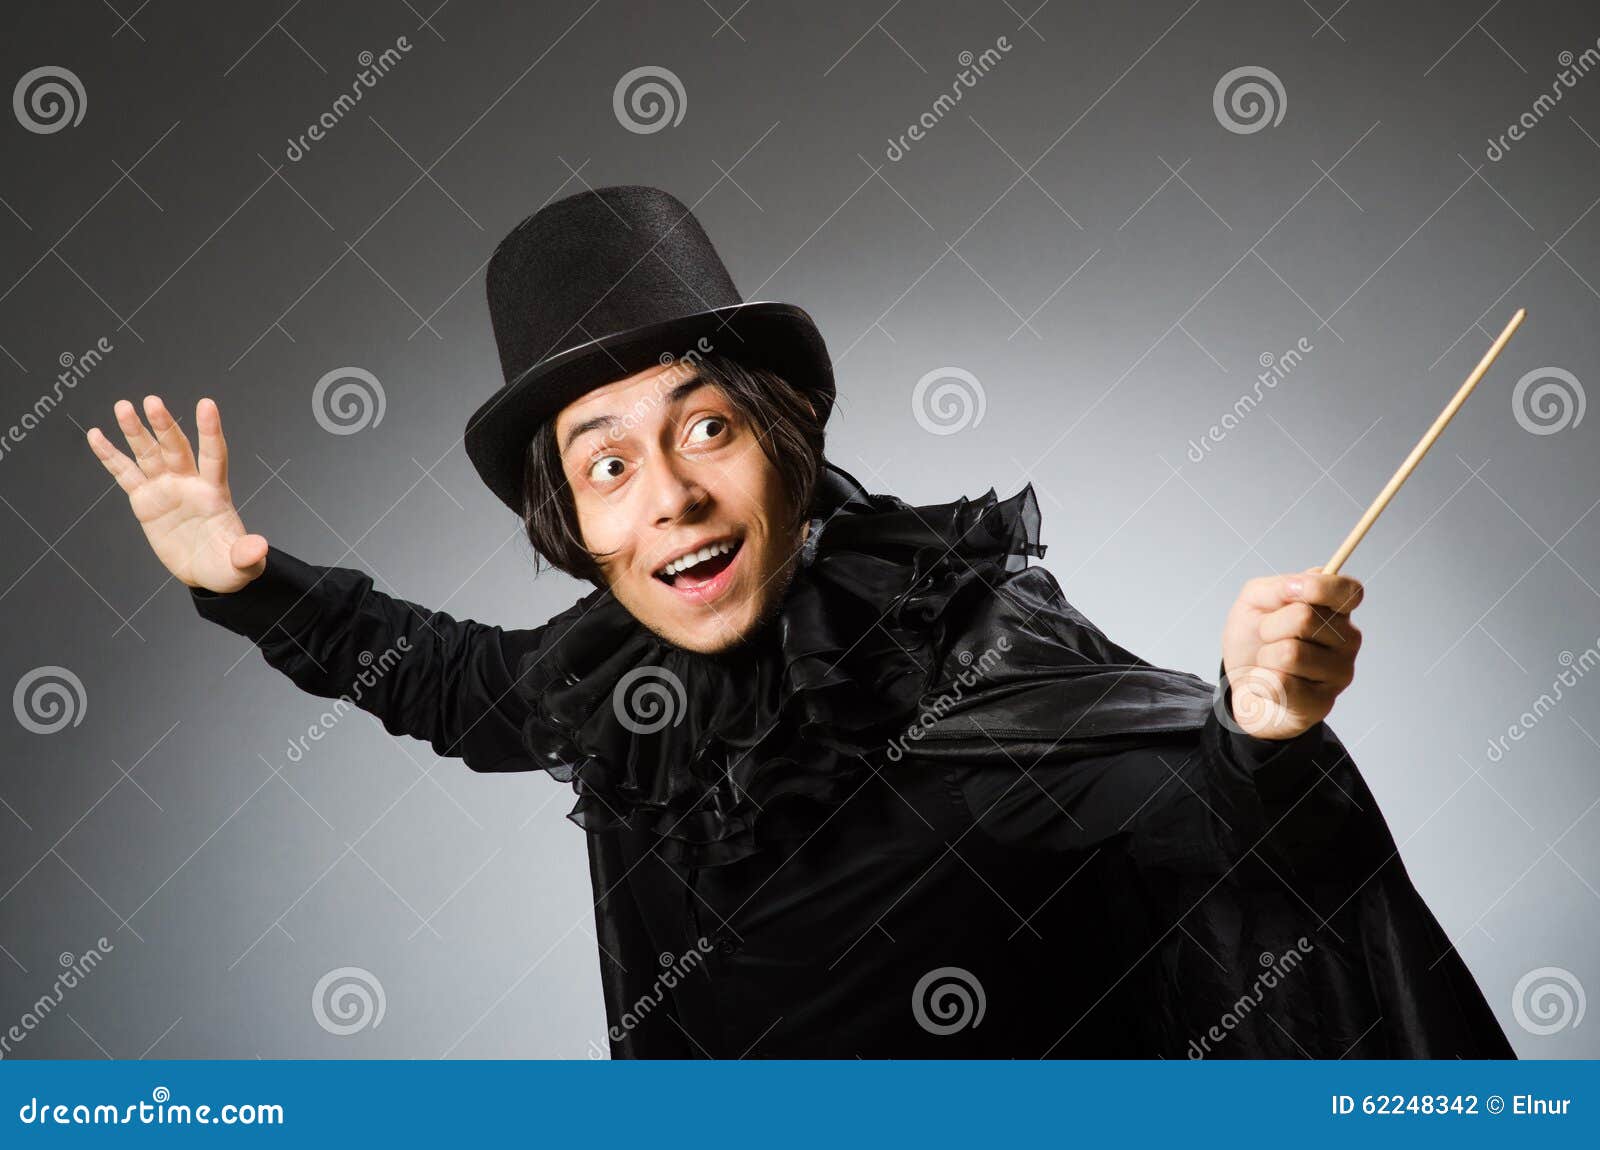 The Funny Magician Wearing Cylinder Hat Stock Photo - Image of girl ...